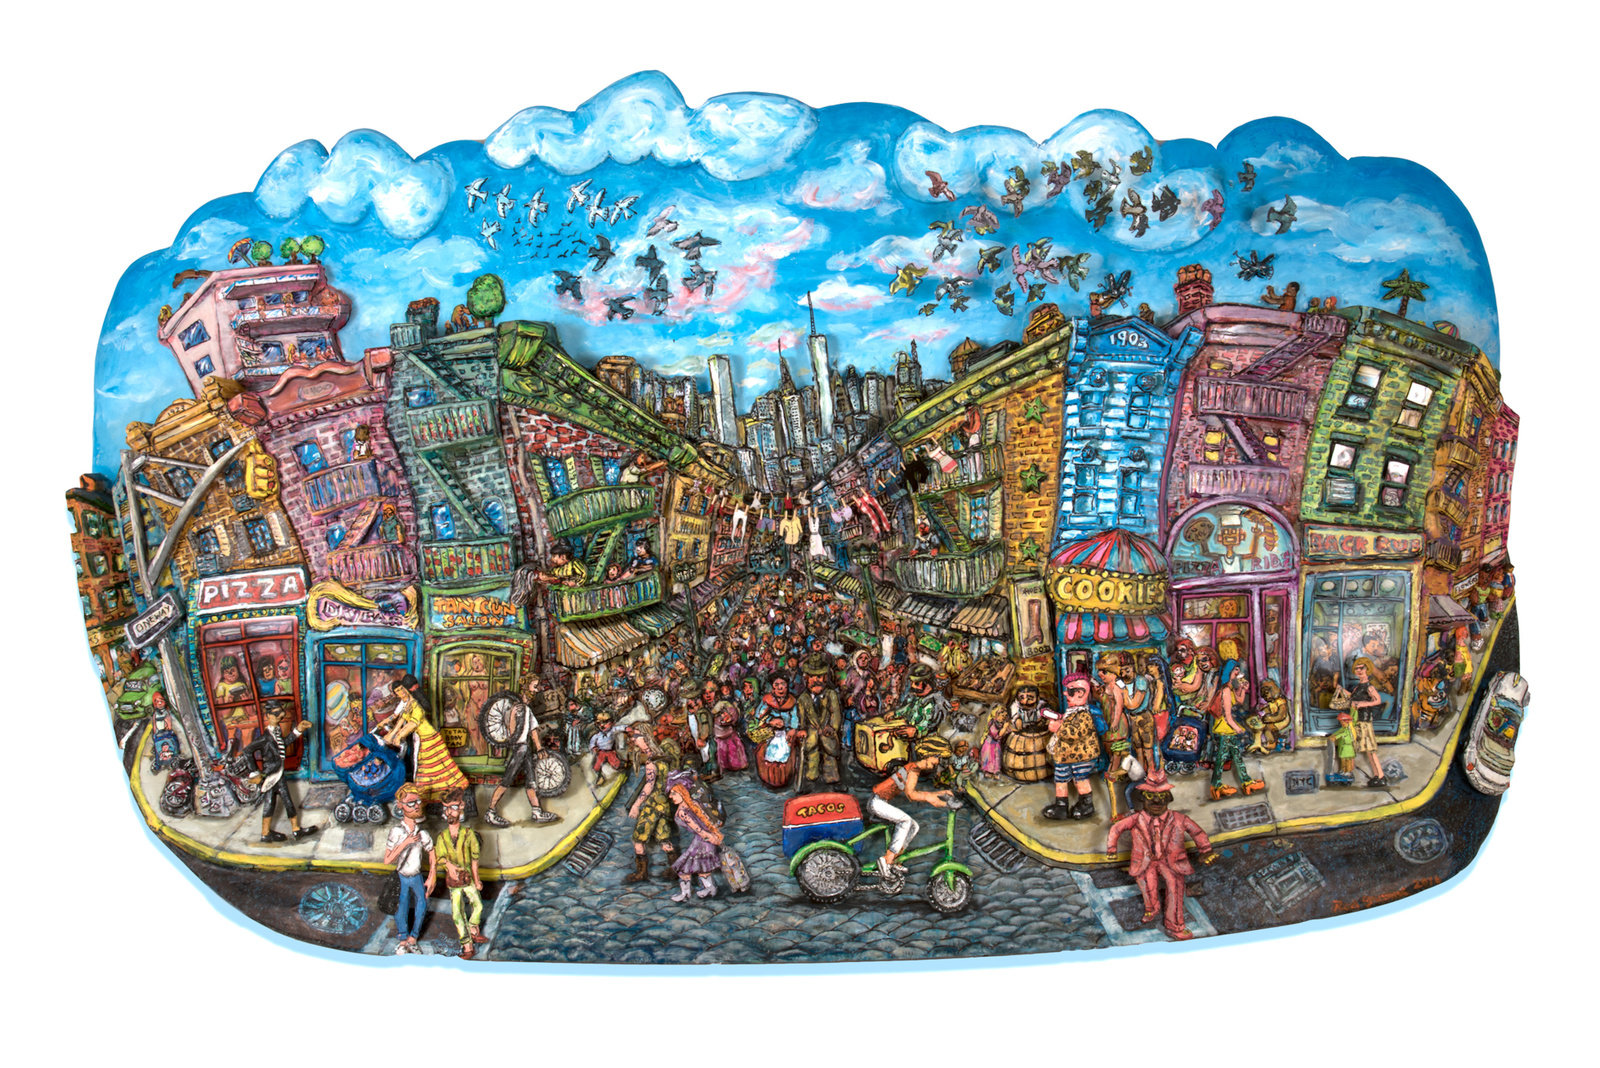 Grooms, little italy meets nolita, 2016, acrylic, mixed media, and epoxy mounted on wood, 45 x 72 x 8 in., non 58.578